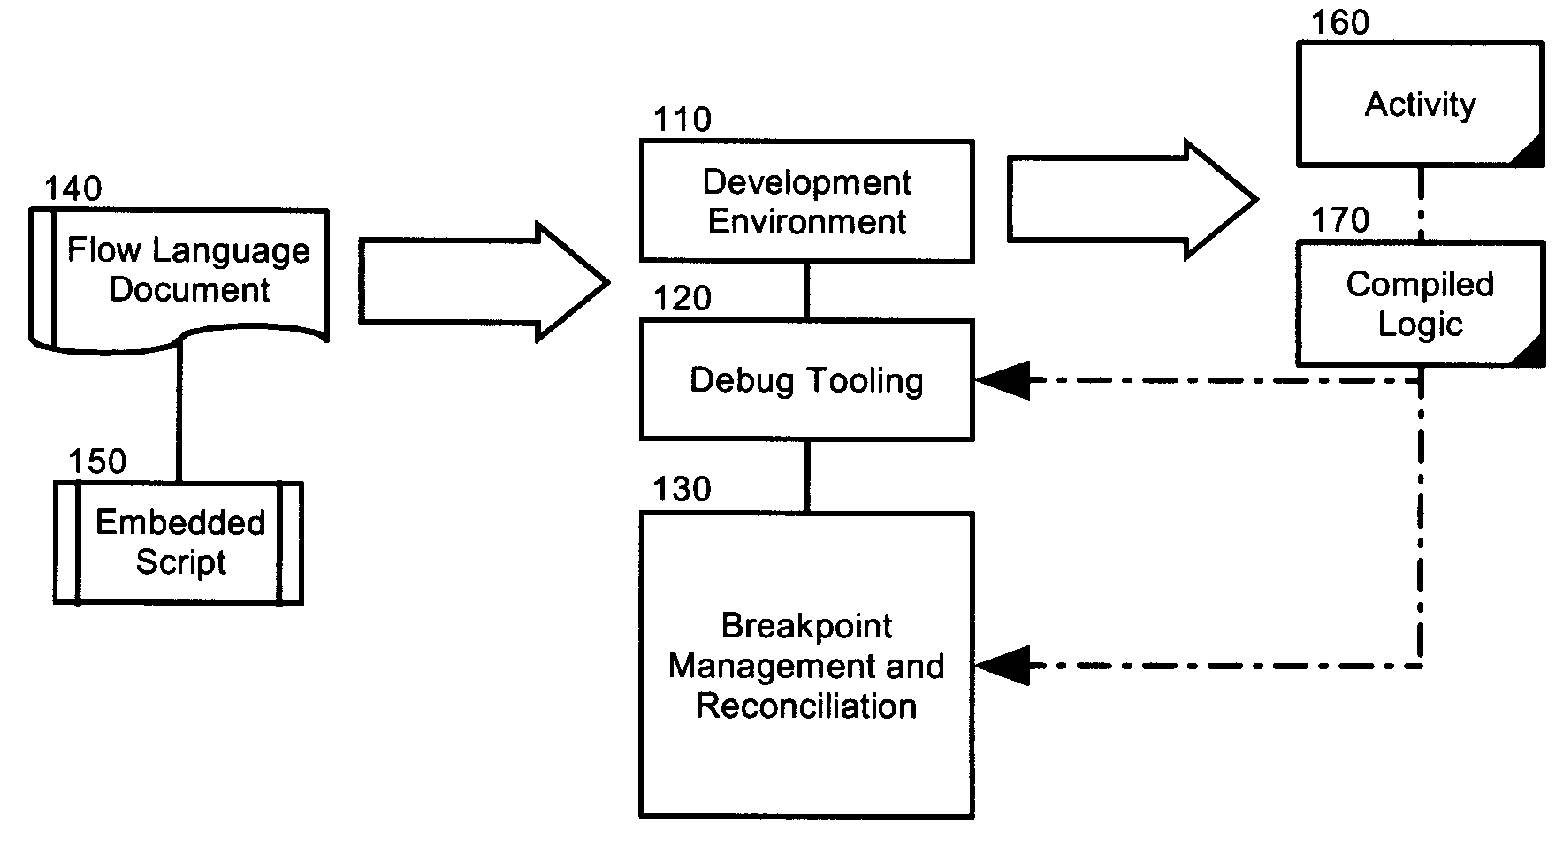 Breakpoint management and reconciliation for embedded scripts in a business integration language specified program process